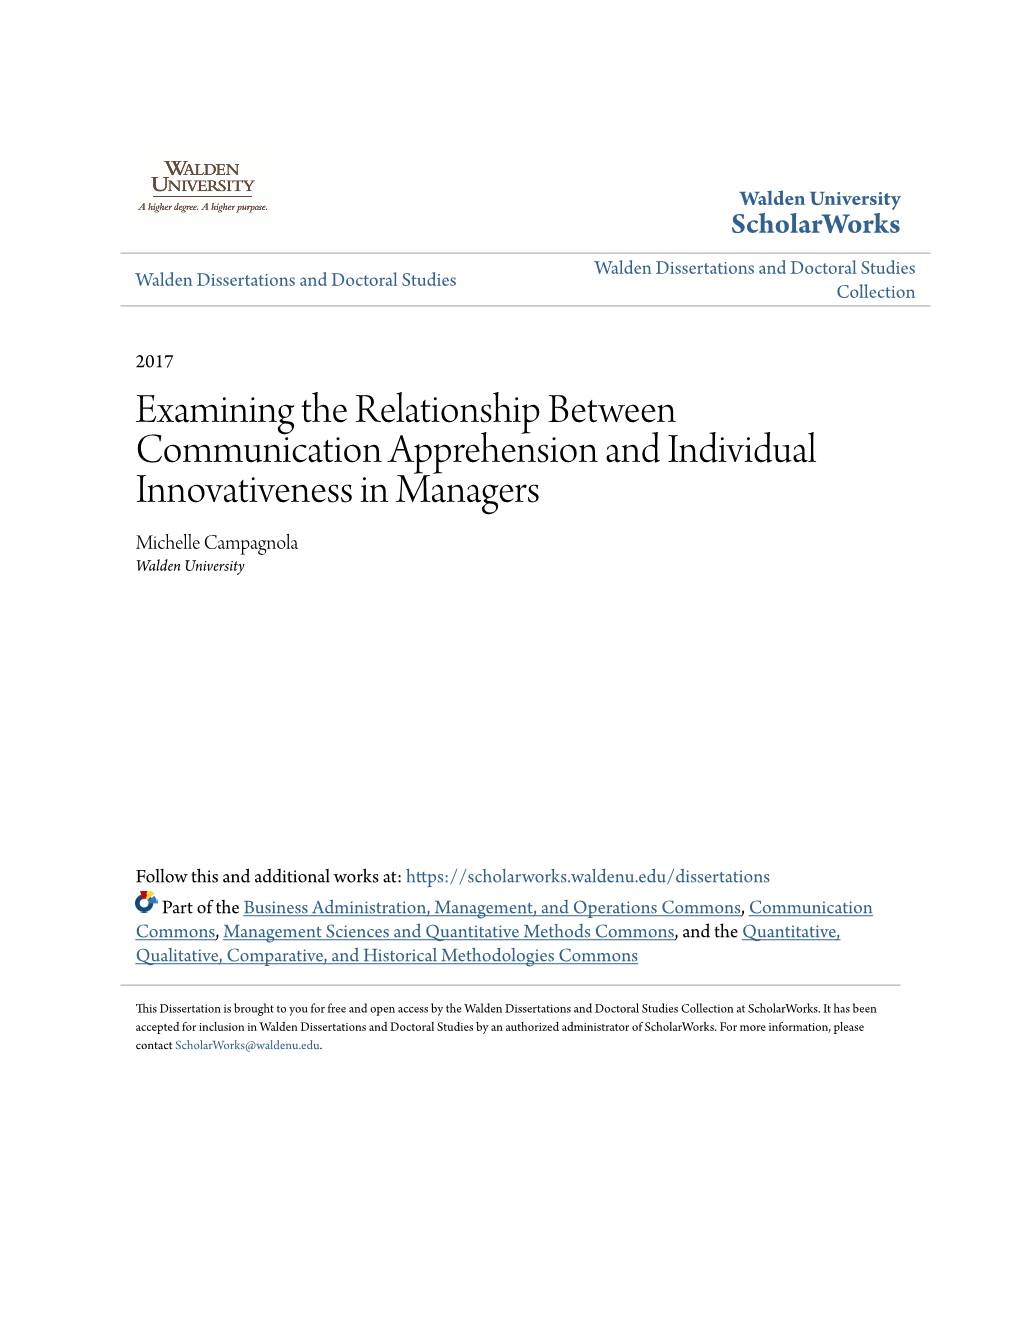 Examining the Relationship Between Communication Apprehension and Individual Innovativeness in Managers Michelle Campagnola Walden University